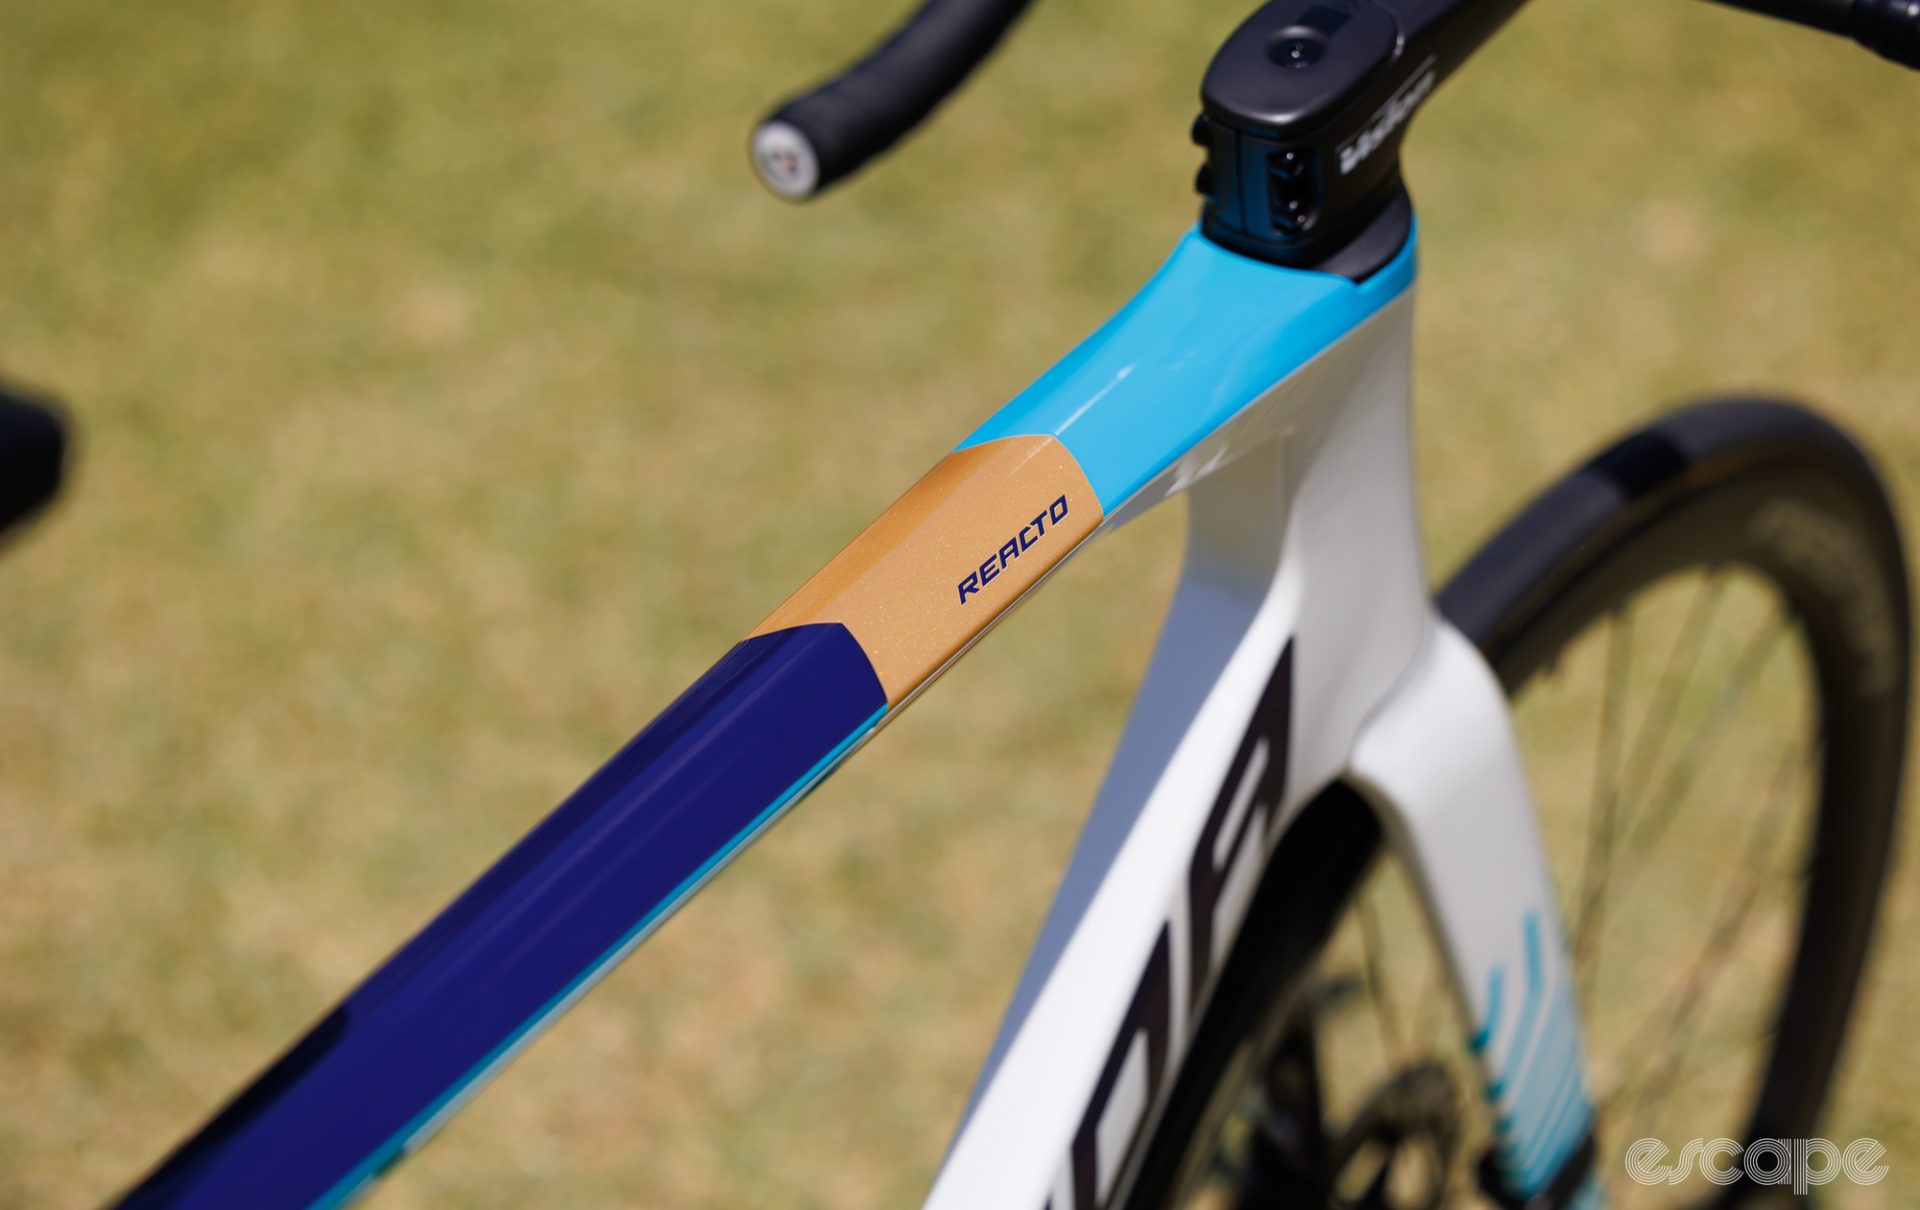 Distinctive paint with blocked light blue, tan, and dark blue sections on the top tube.